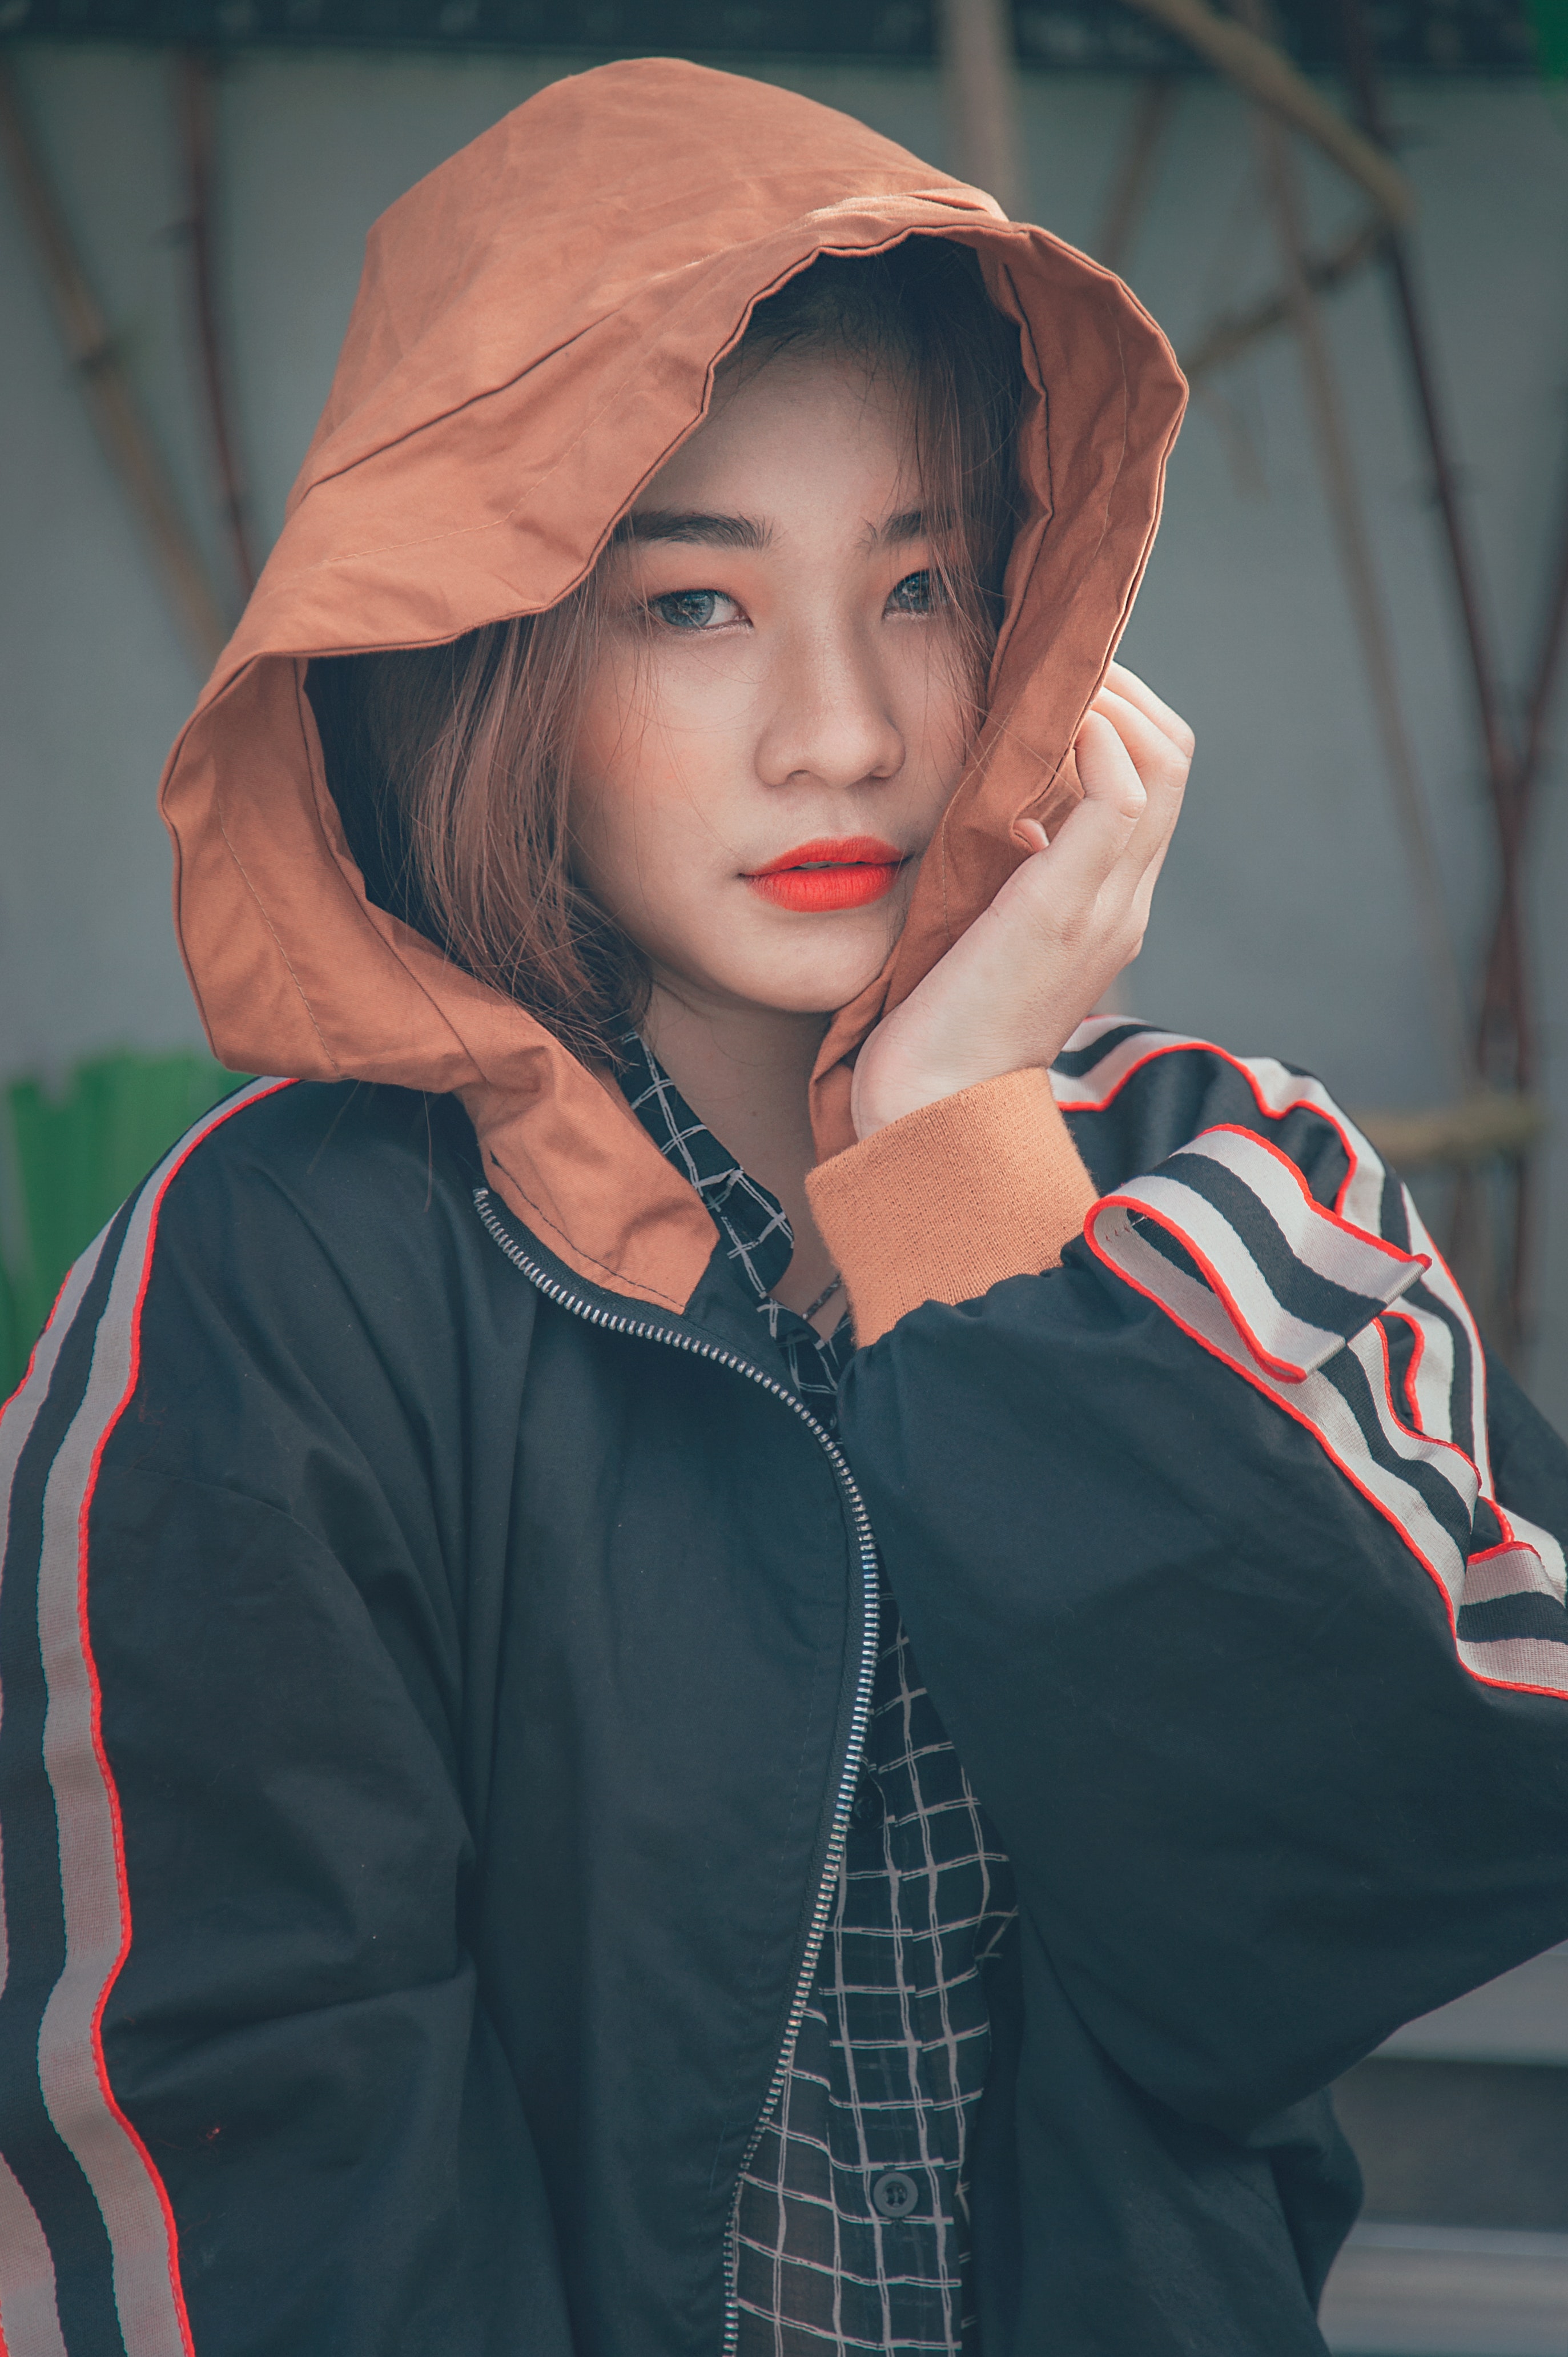 Free photo: Woman in Black and Orange Zip-up Hoodie - Adolescent ...